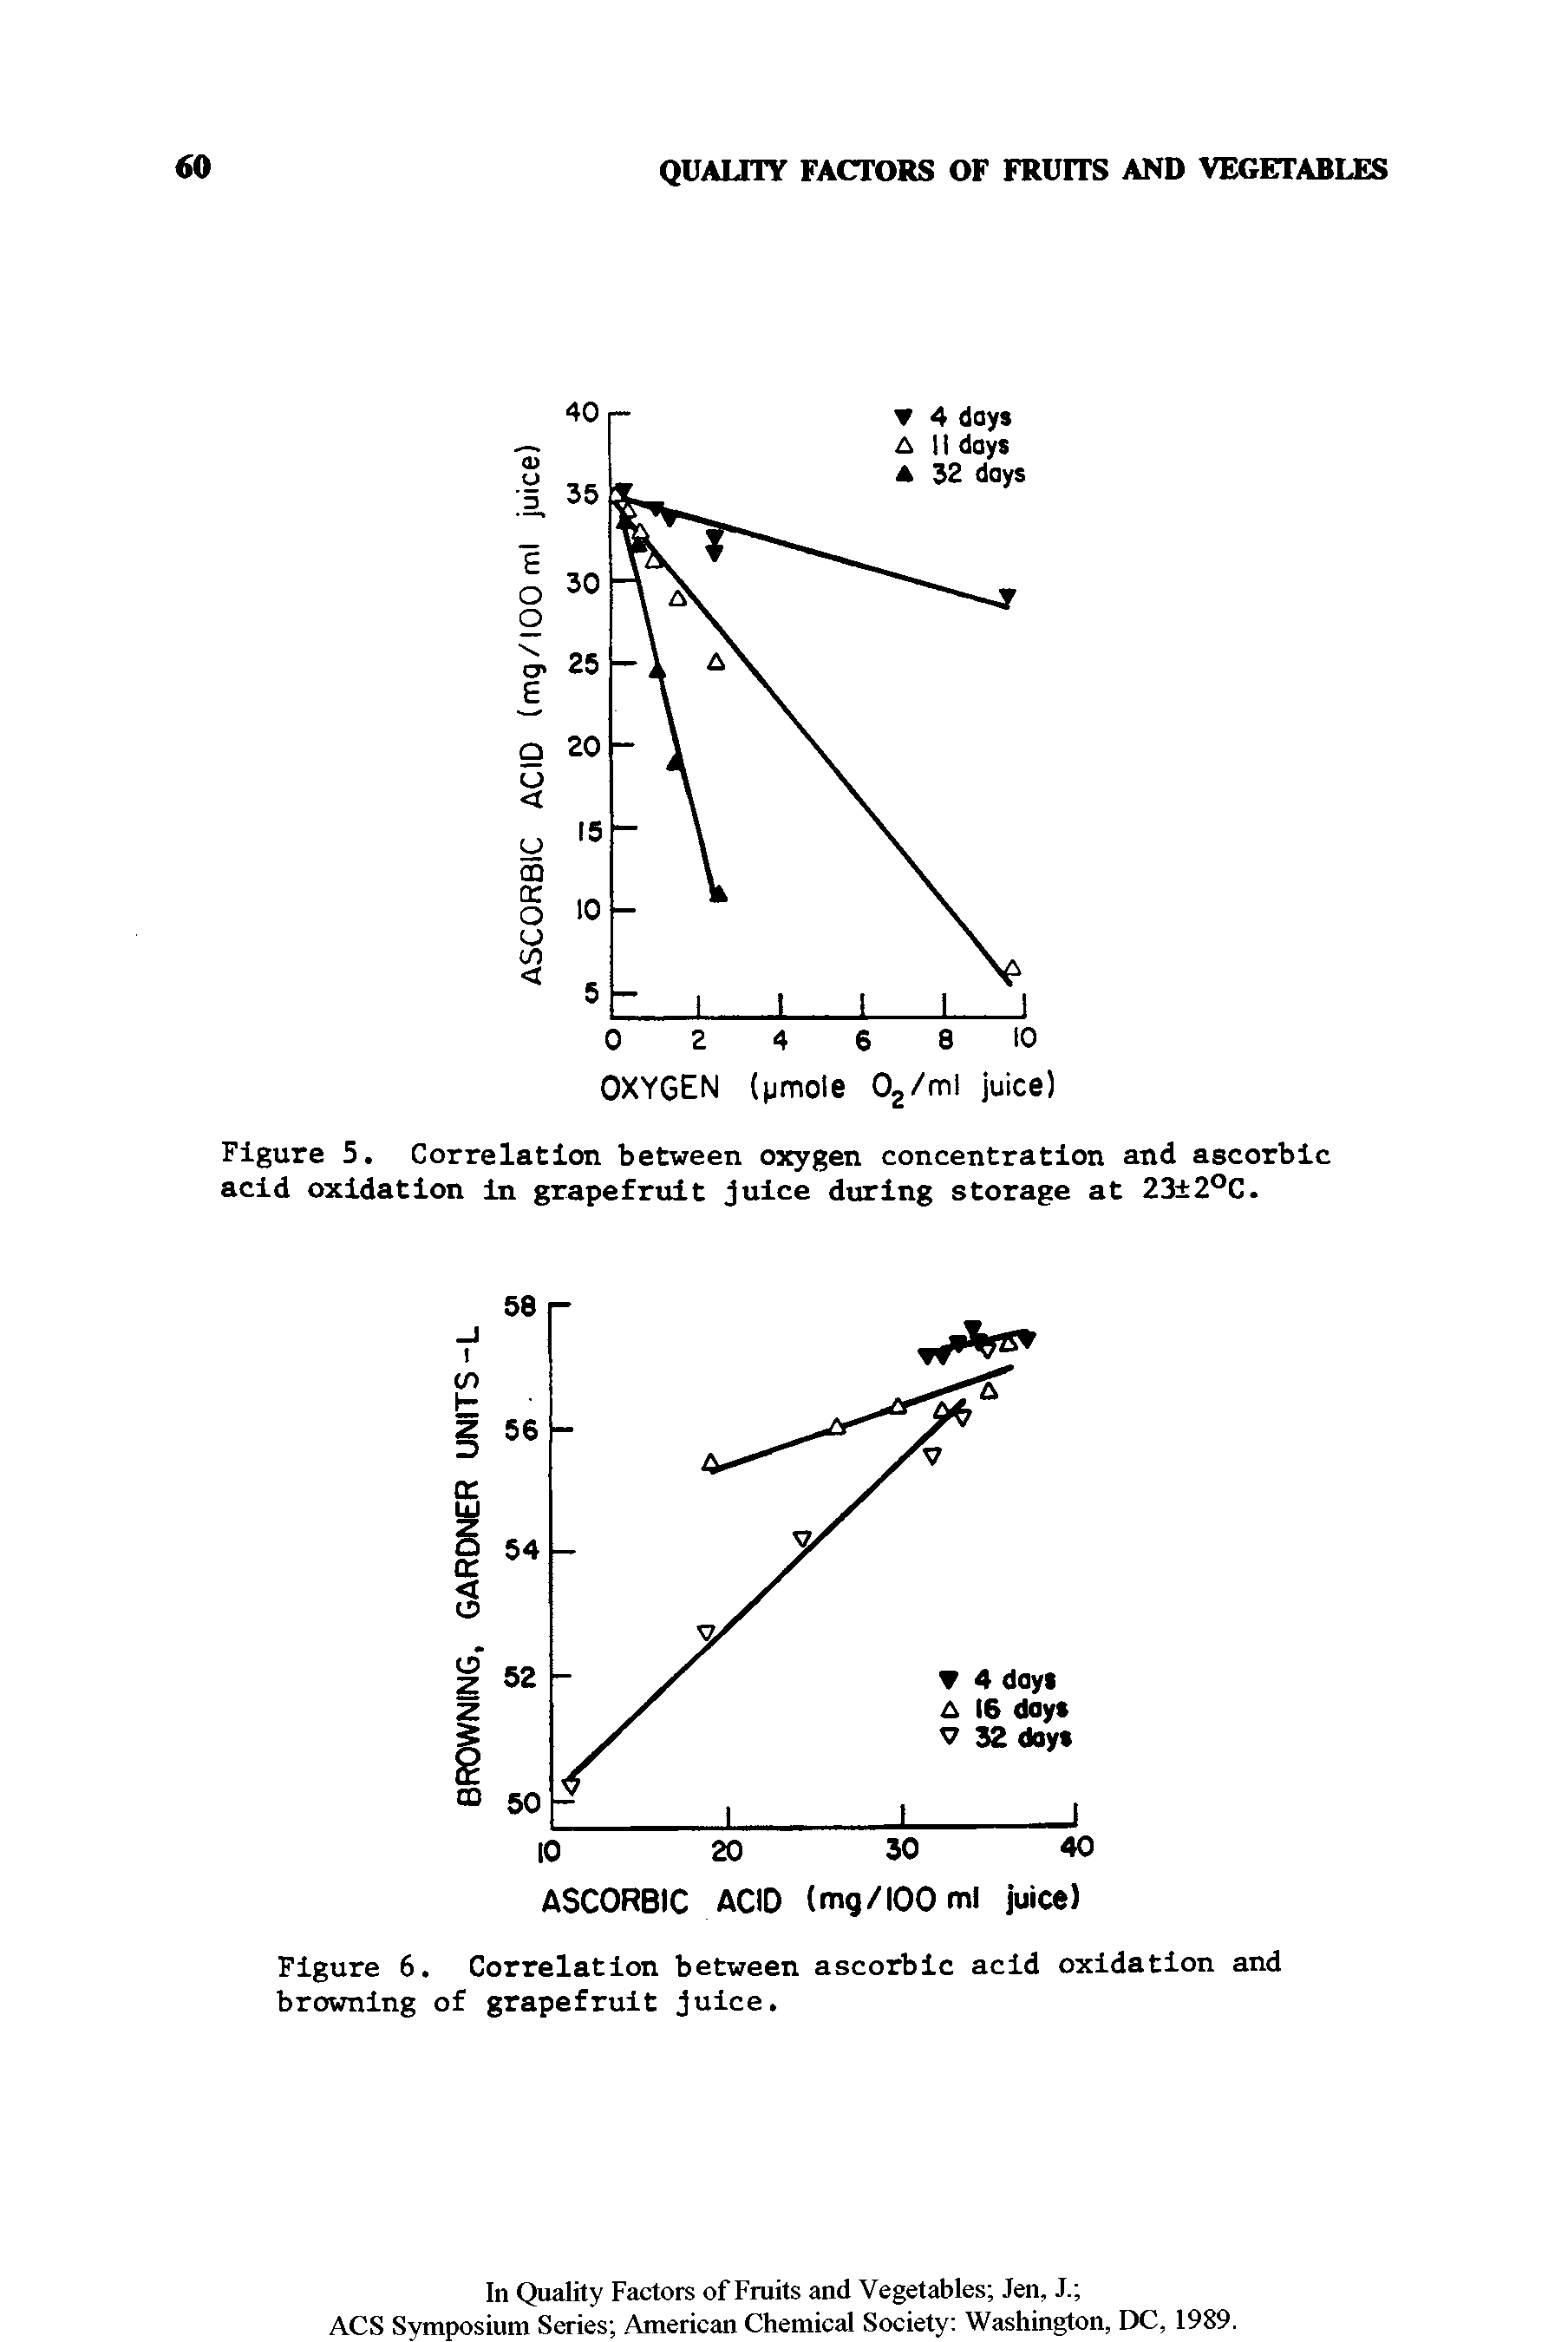 Figure 5. Correlation between oxygen concentration and ascorbic acid oxidation in grapefruit juice during storage at 23 2°C.